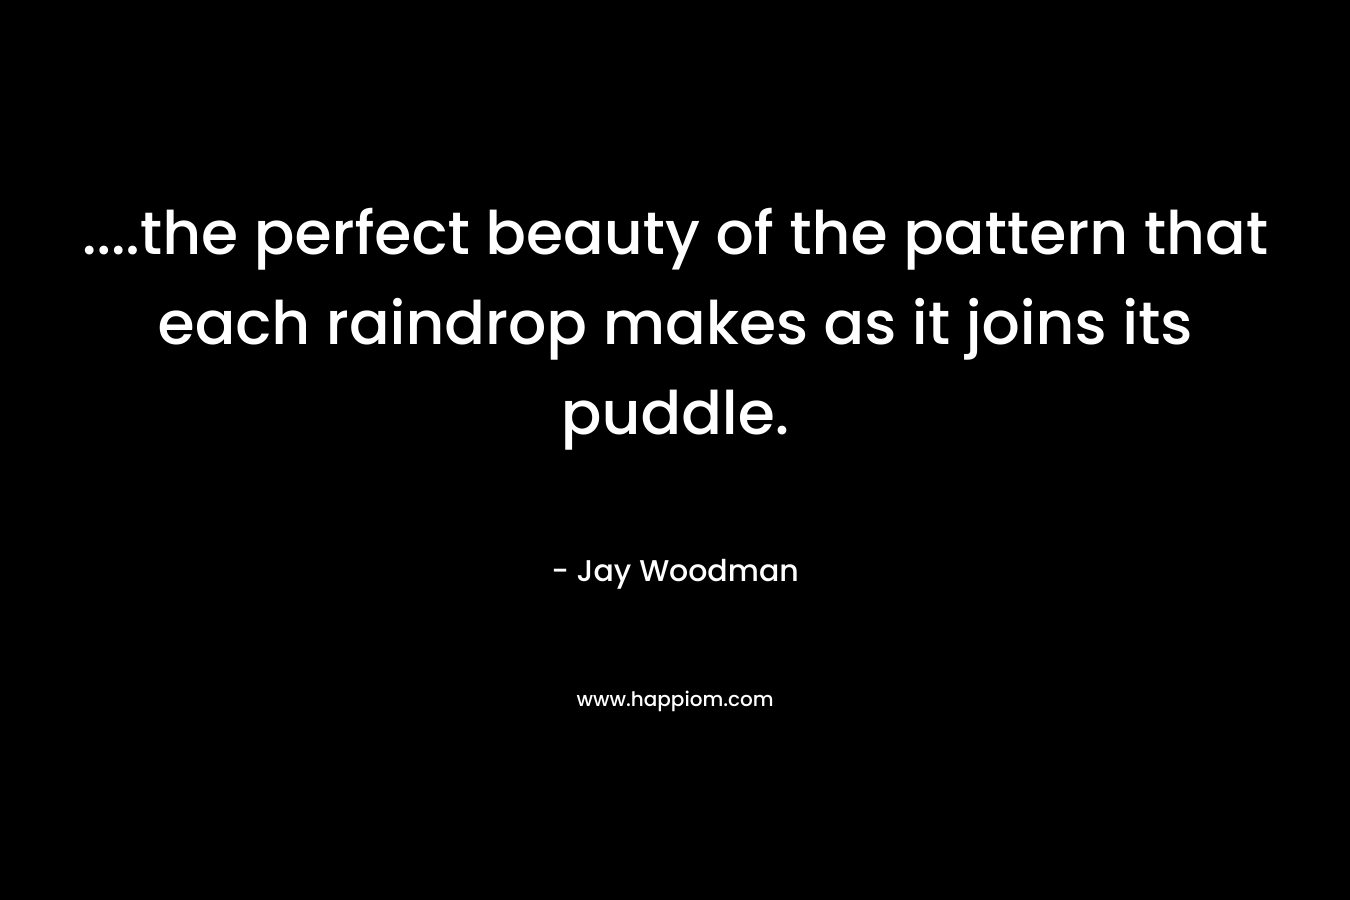 ….the perfect beauty of the pattern that each raindrop makes as it joins its puddle. – Jay Woodman